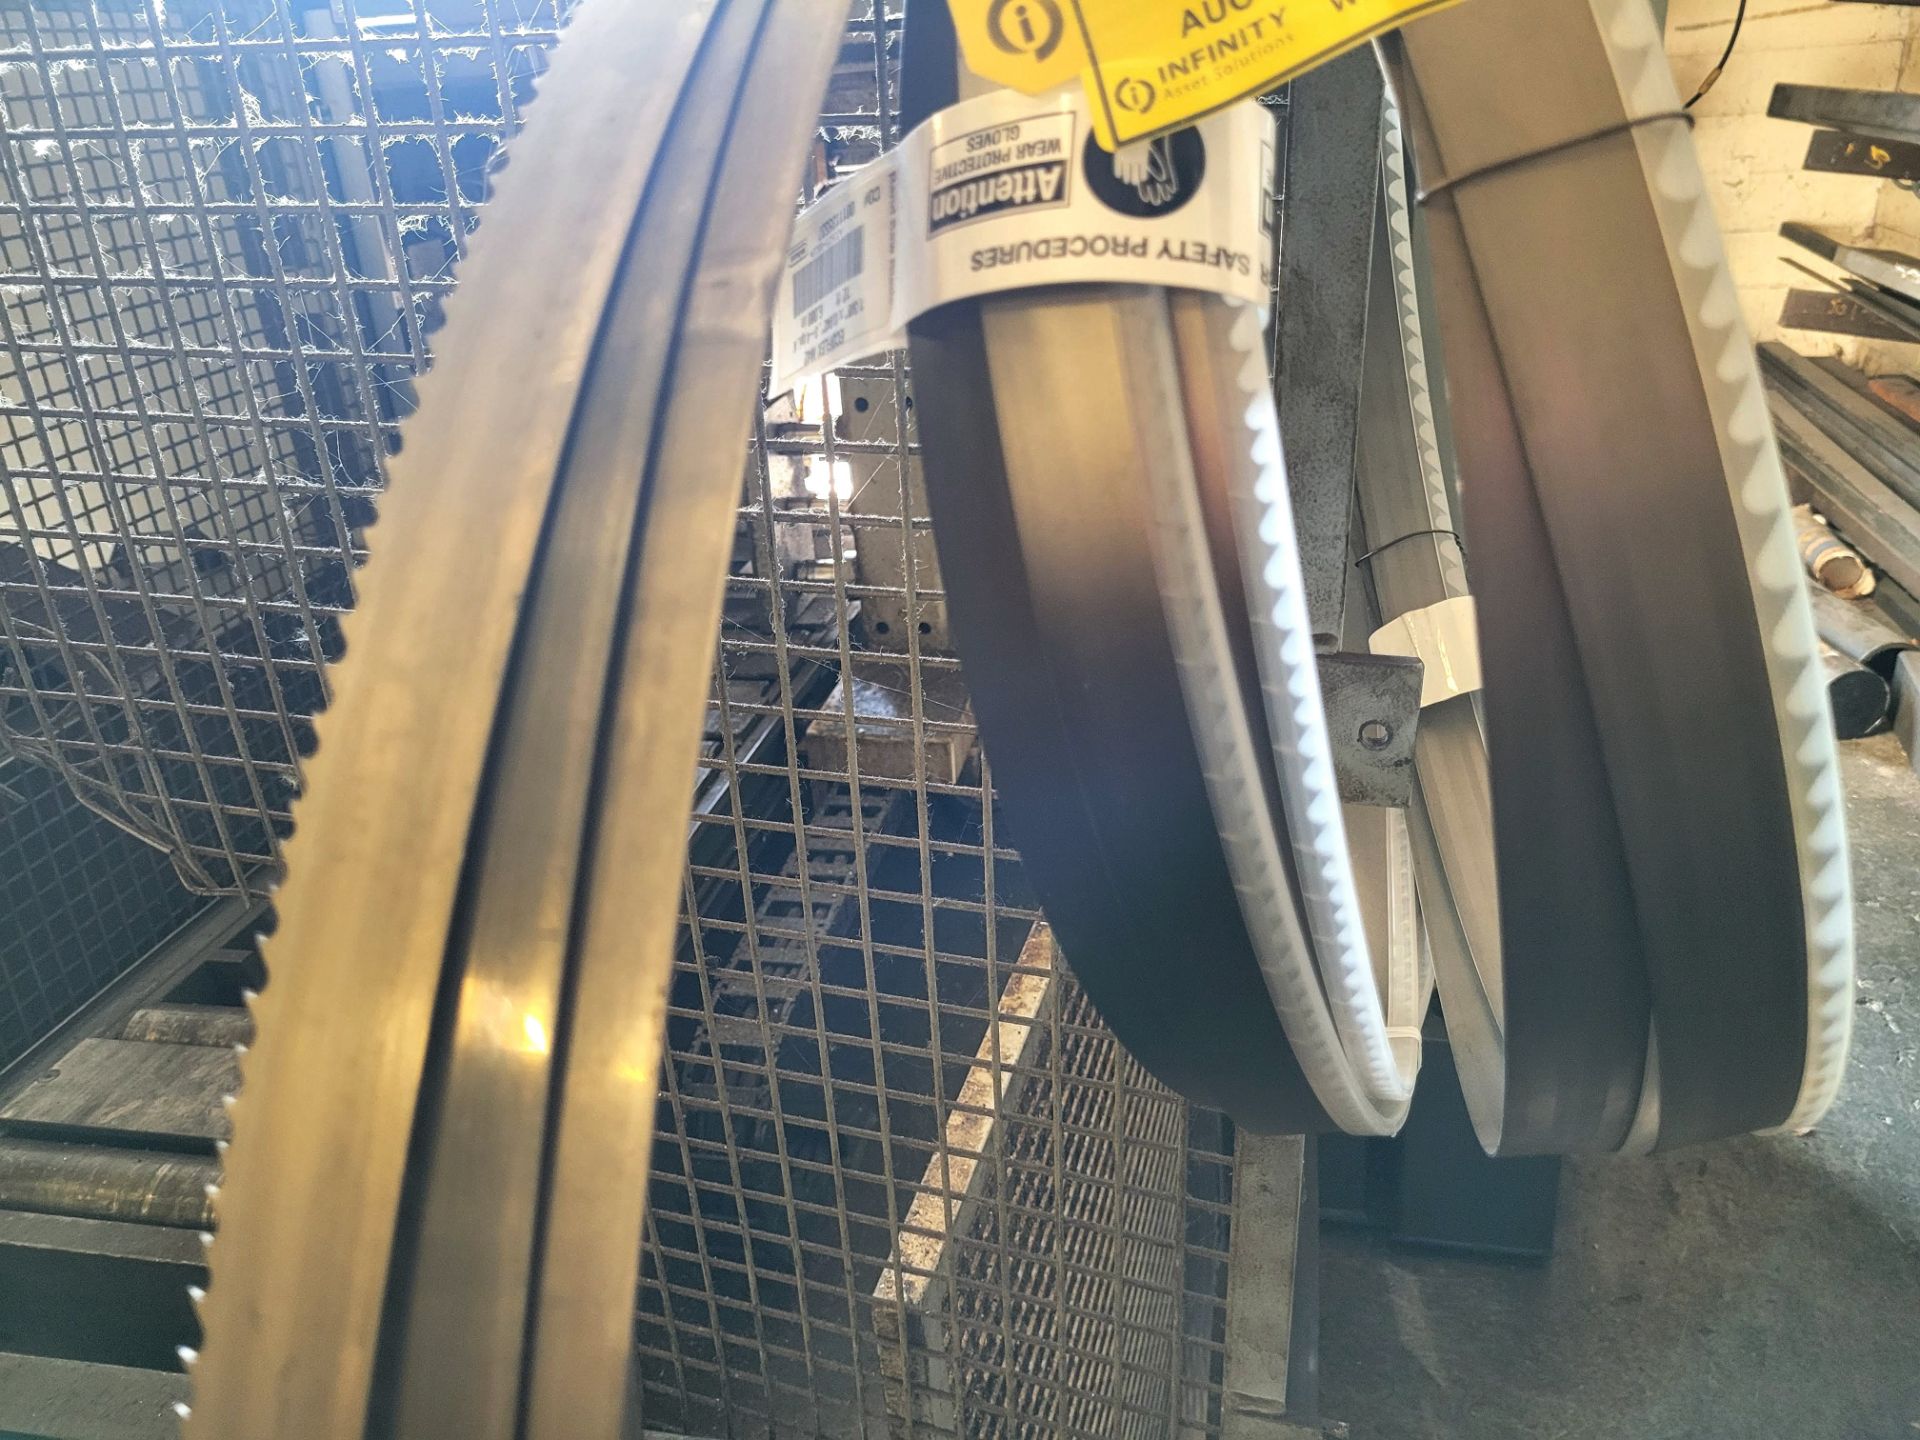 LOT OF SPARE BANDSAW BLADES - Image 2 of 3